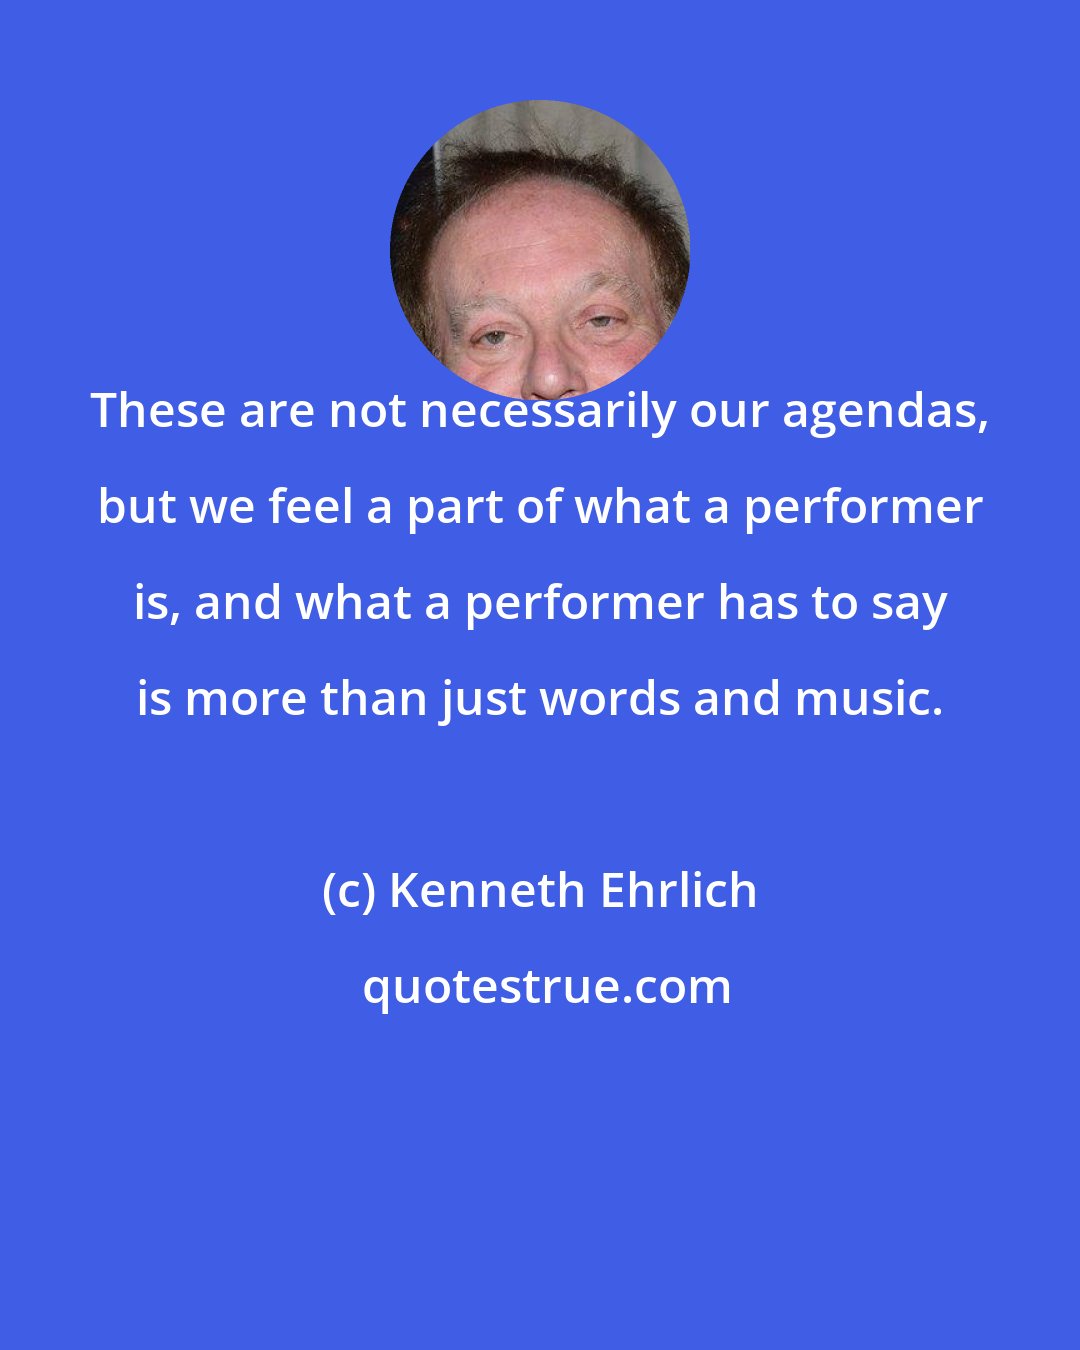 Kenneth Ehrlich: These are not necessarily our agendas, but we feel a part of what a performer is, and what a performer has to say is more than just words and music.